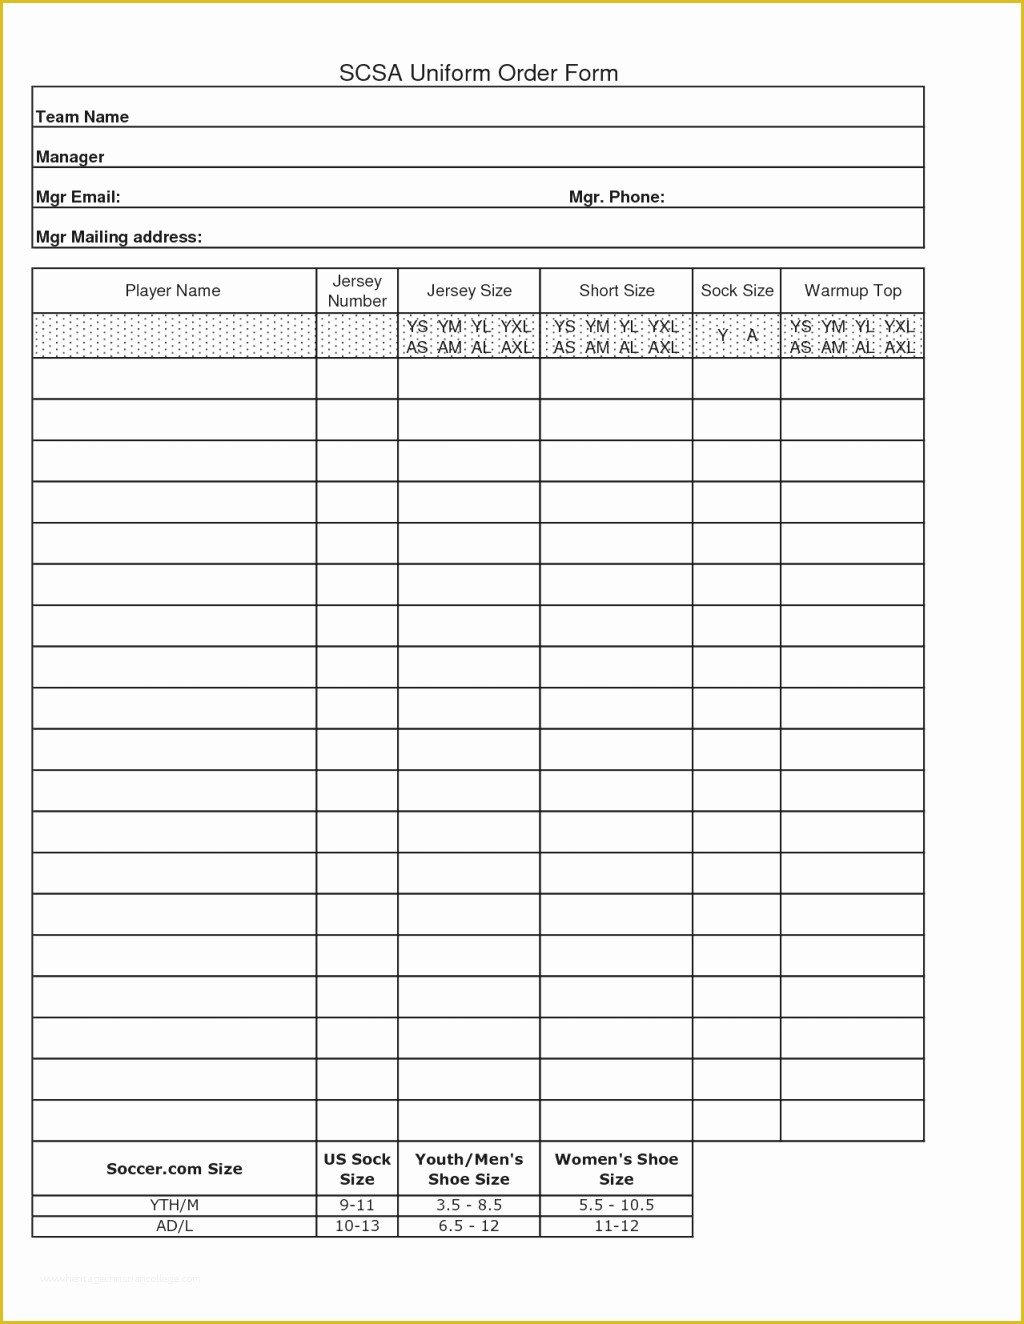 Custom order form Template Free Of Fundraising forms Templates Free Sample Business Loan